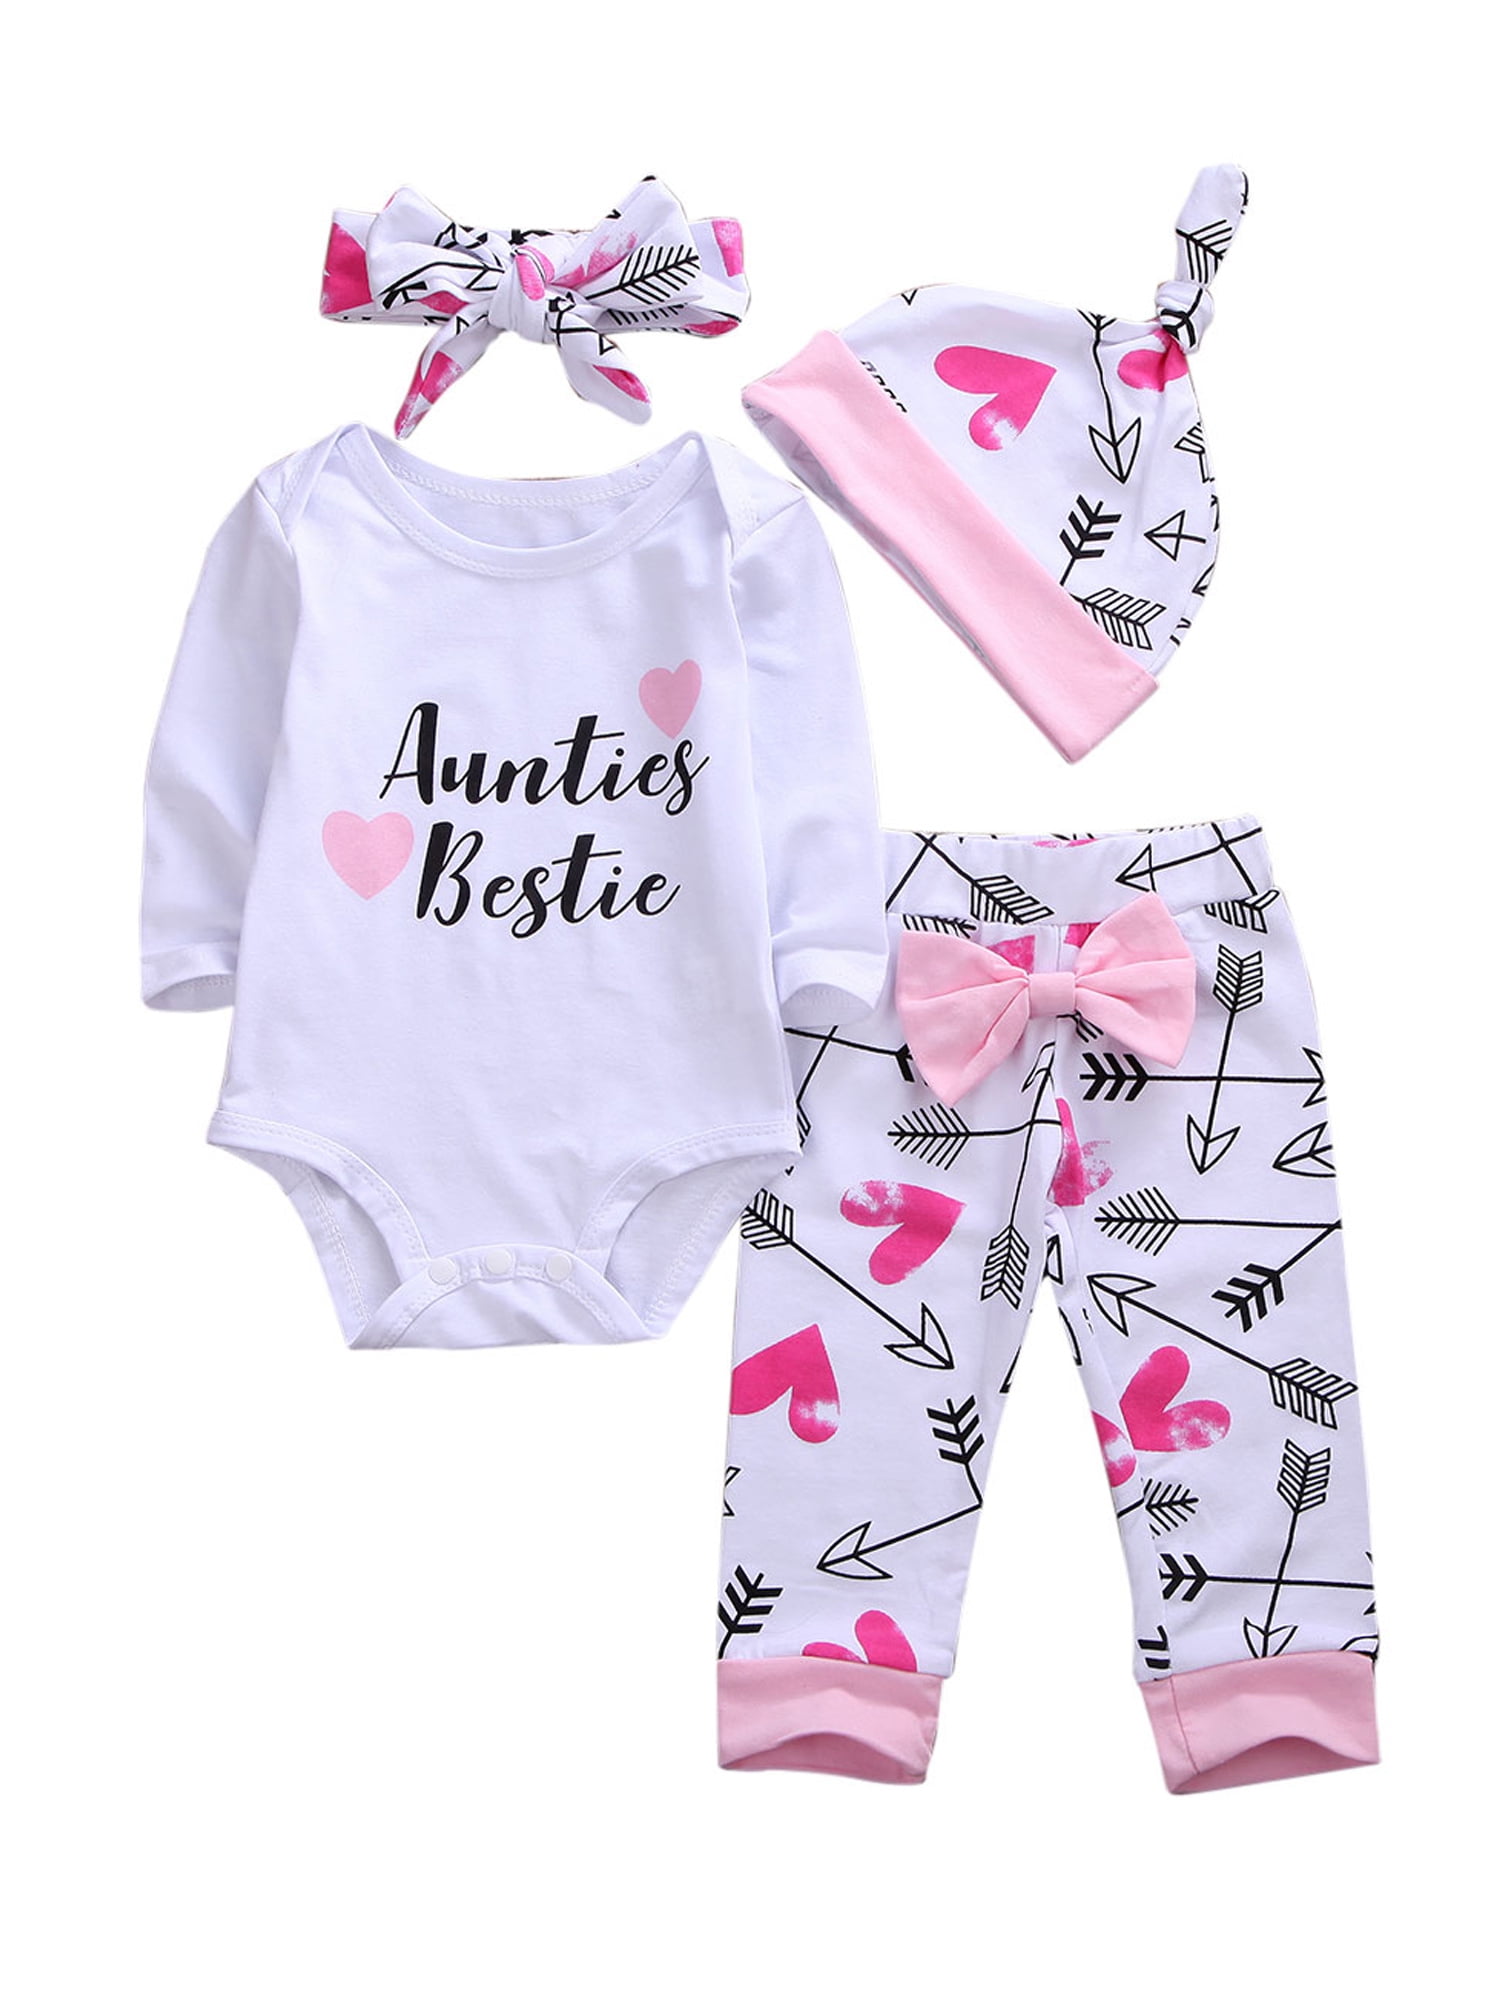 Newborn Girls Clothes Baby Romper Outfit Pants Set Long Sleeve Toddler ...